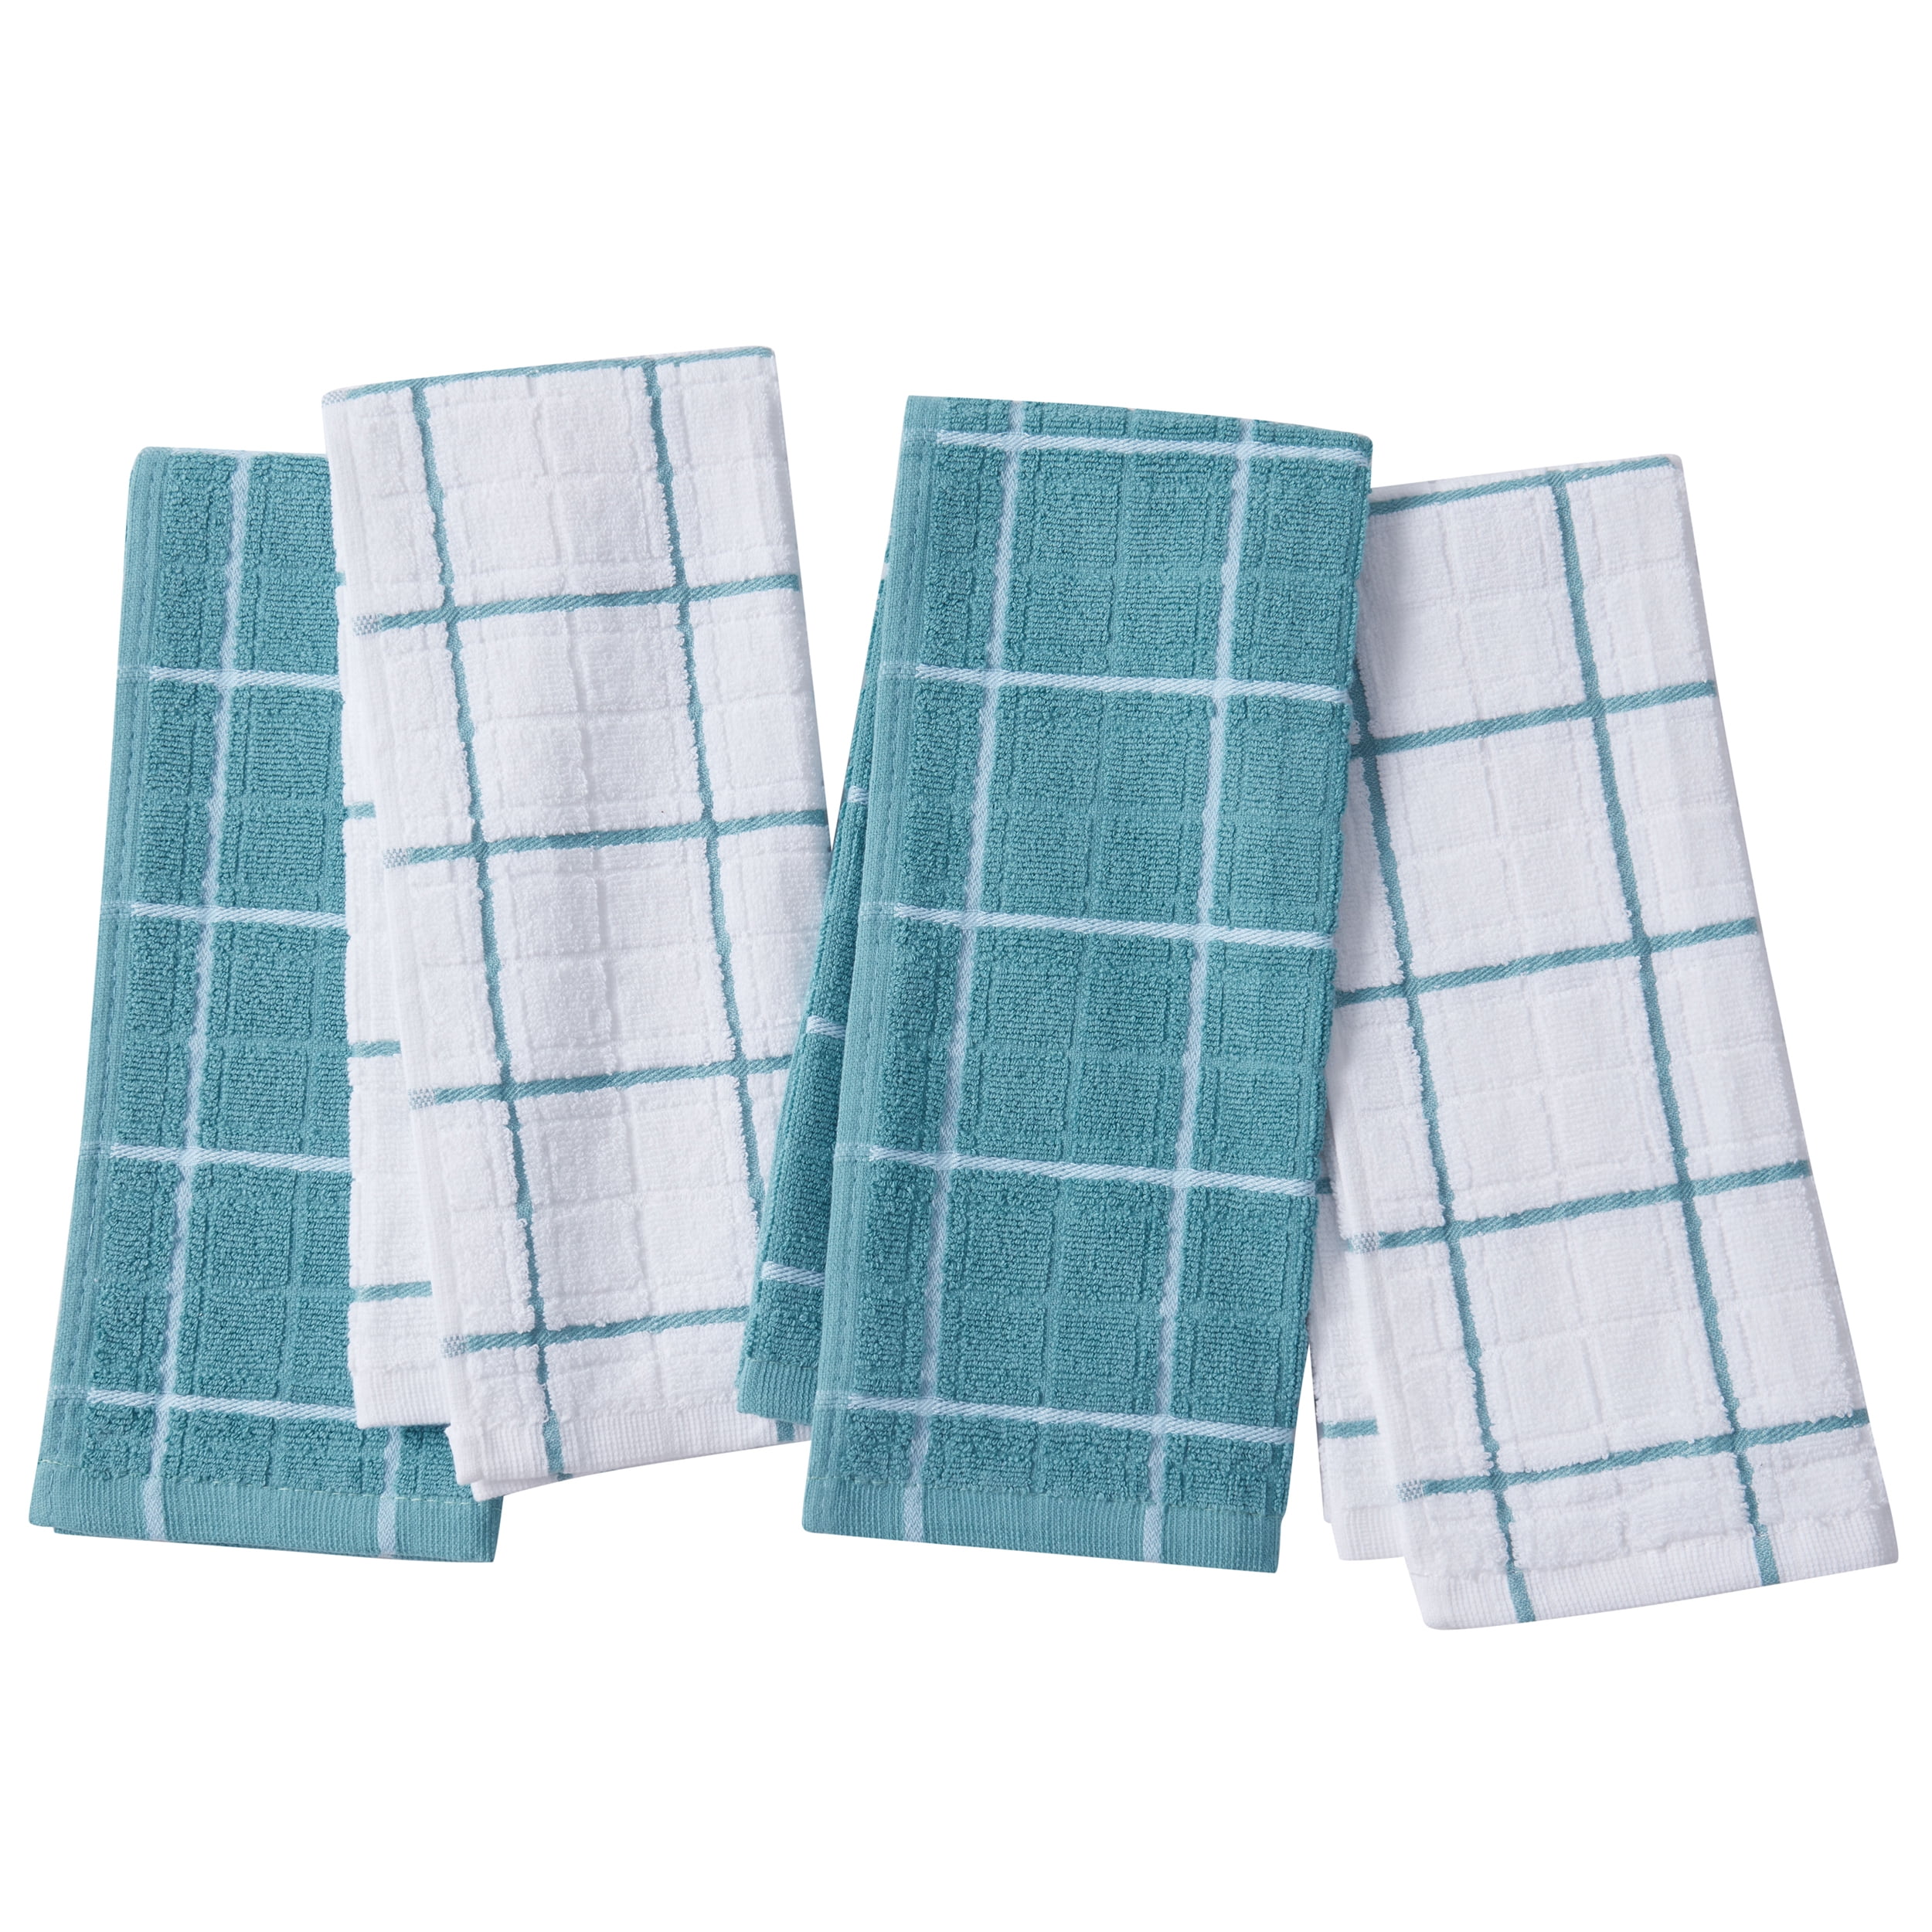 Kitchen Towels  Towel Service and Linen Rental Services from Dempsey